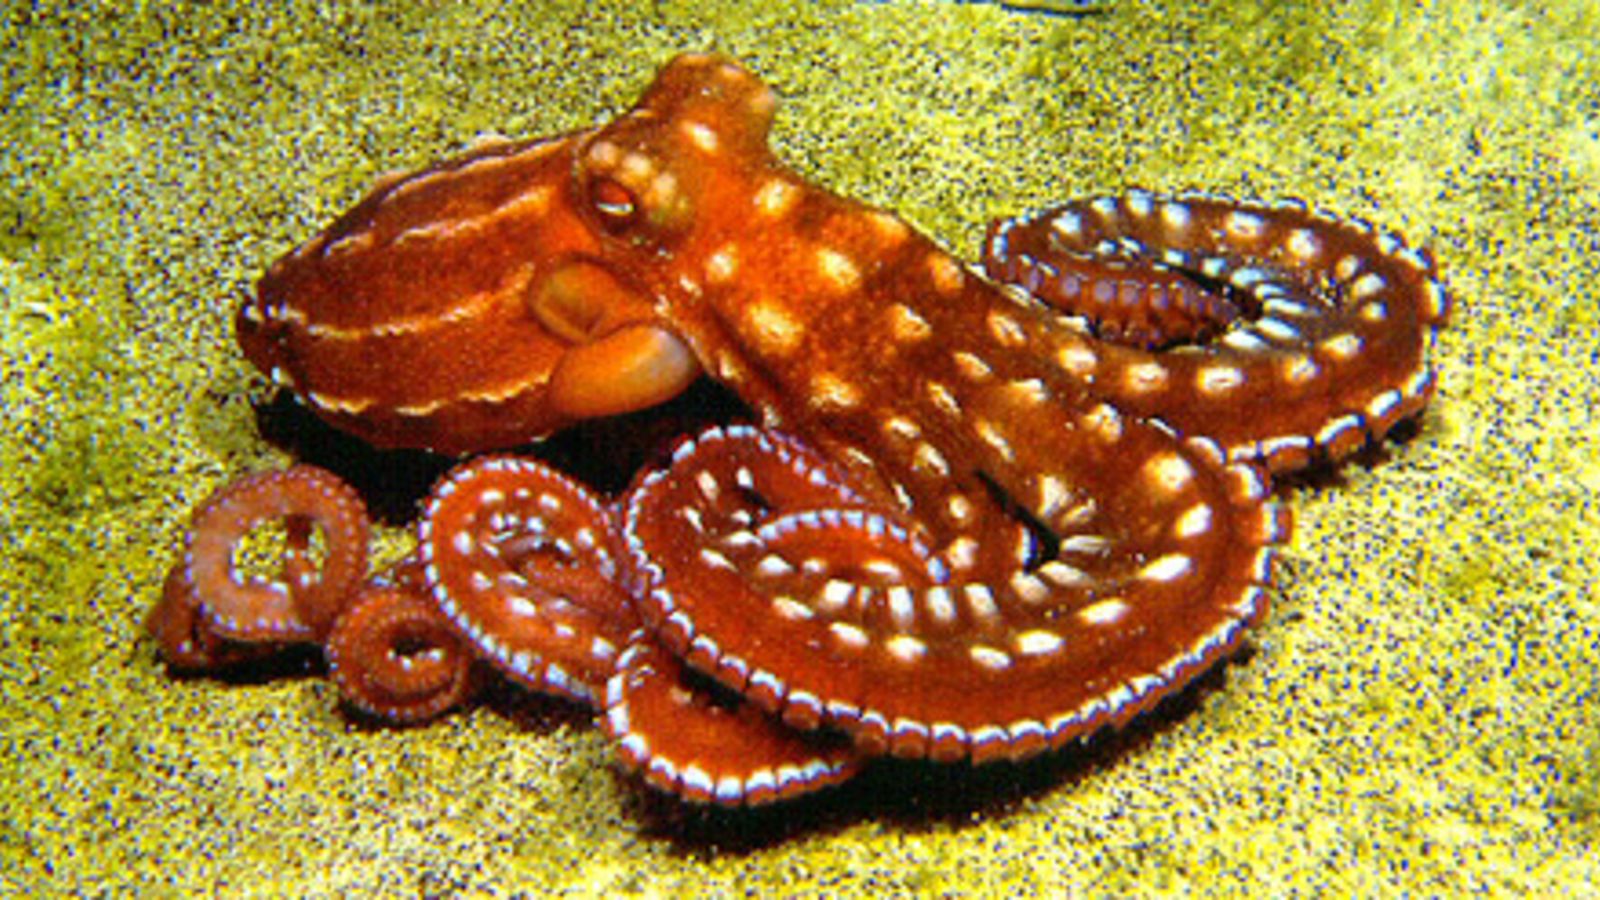 Three Arguments For The Consciousness Of Cephalopods